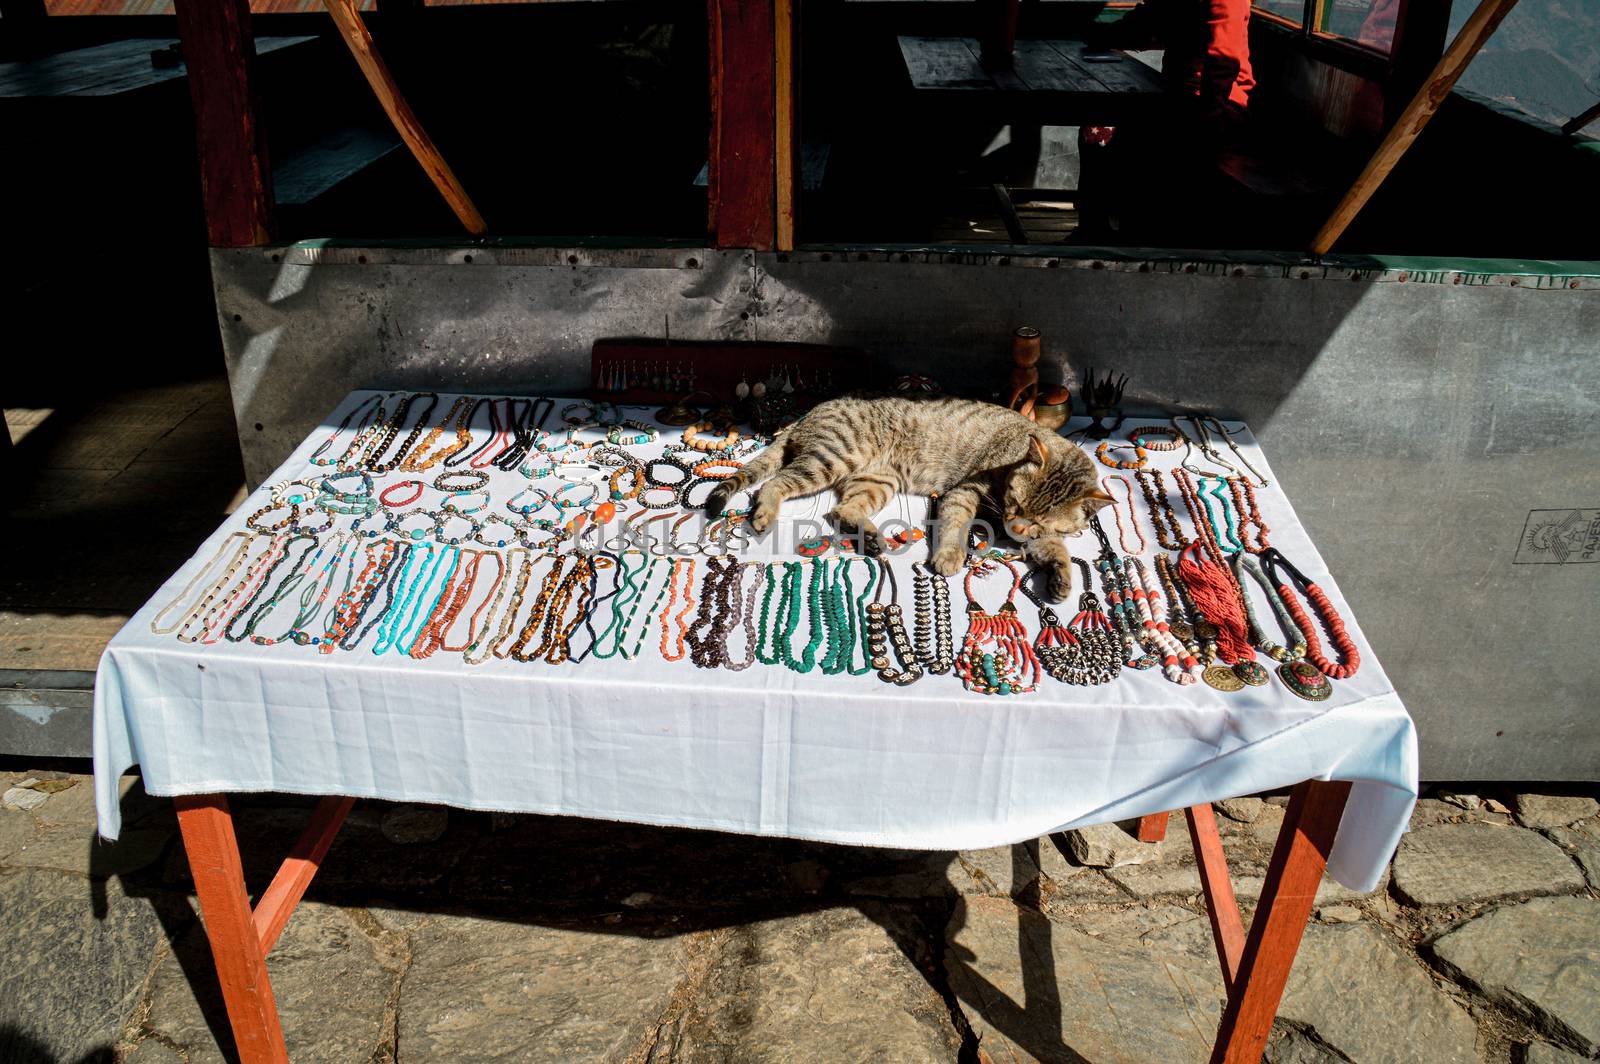 A cat sleeping on a table full of souvenirs for tourist trekking towards Annapurna Base Camp shows the life and local culture of Nepalese people